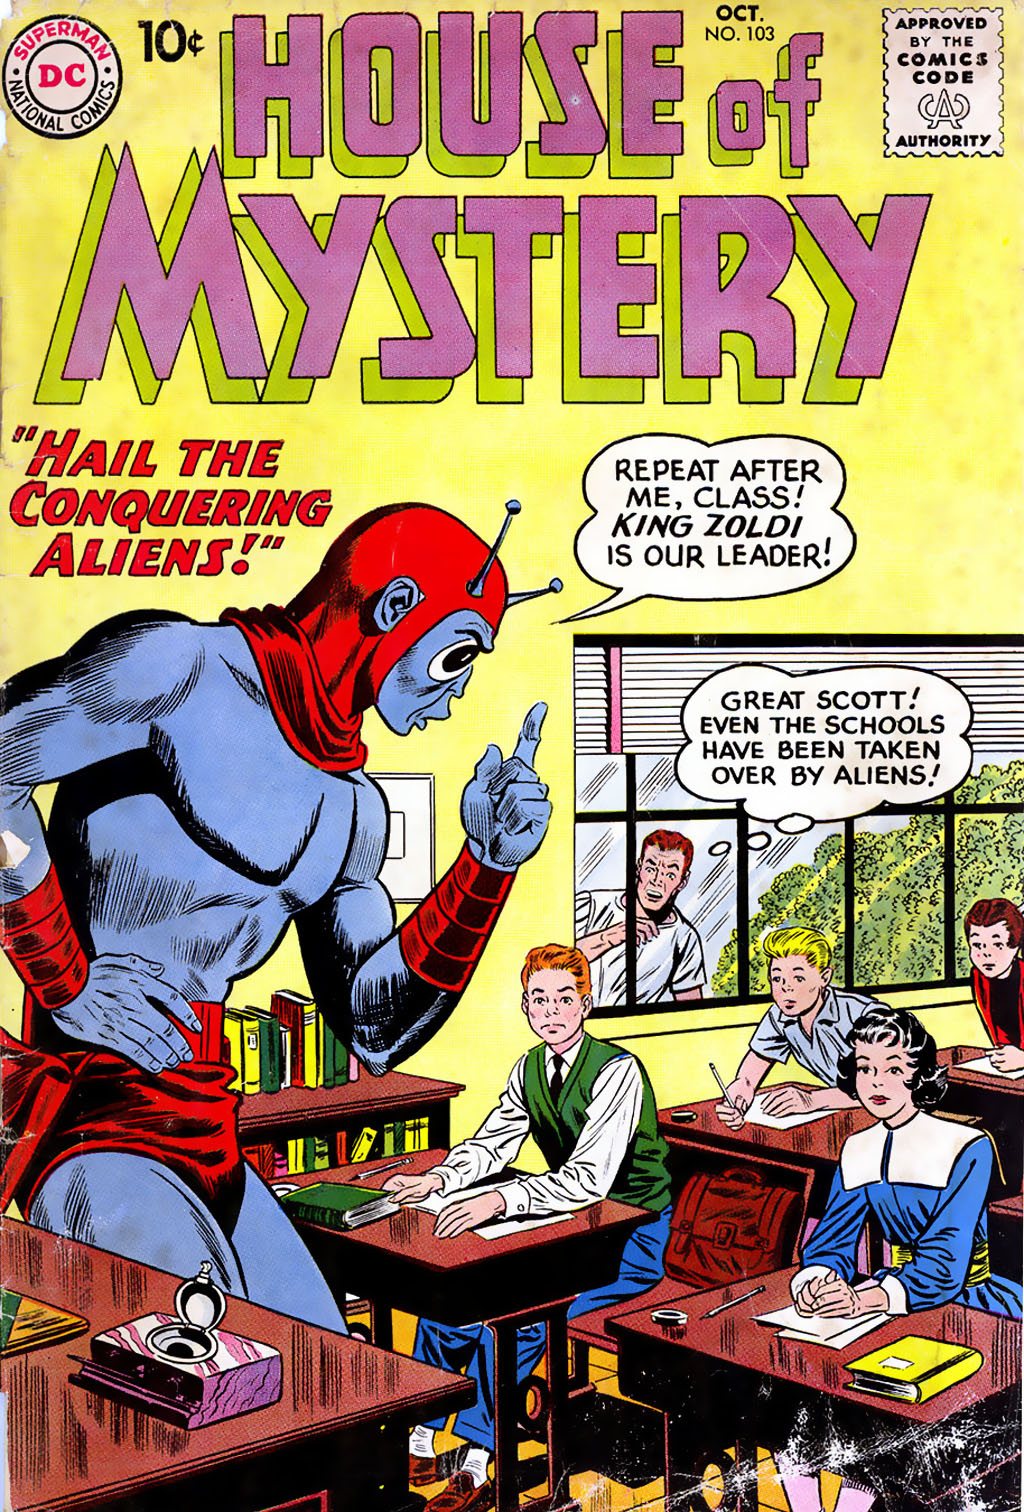 Read online House of Mystery (1951) comic -  Issue #103 - 1